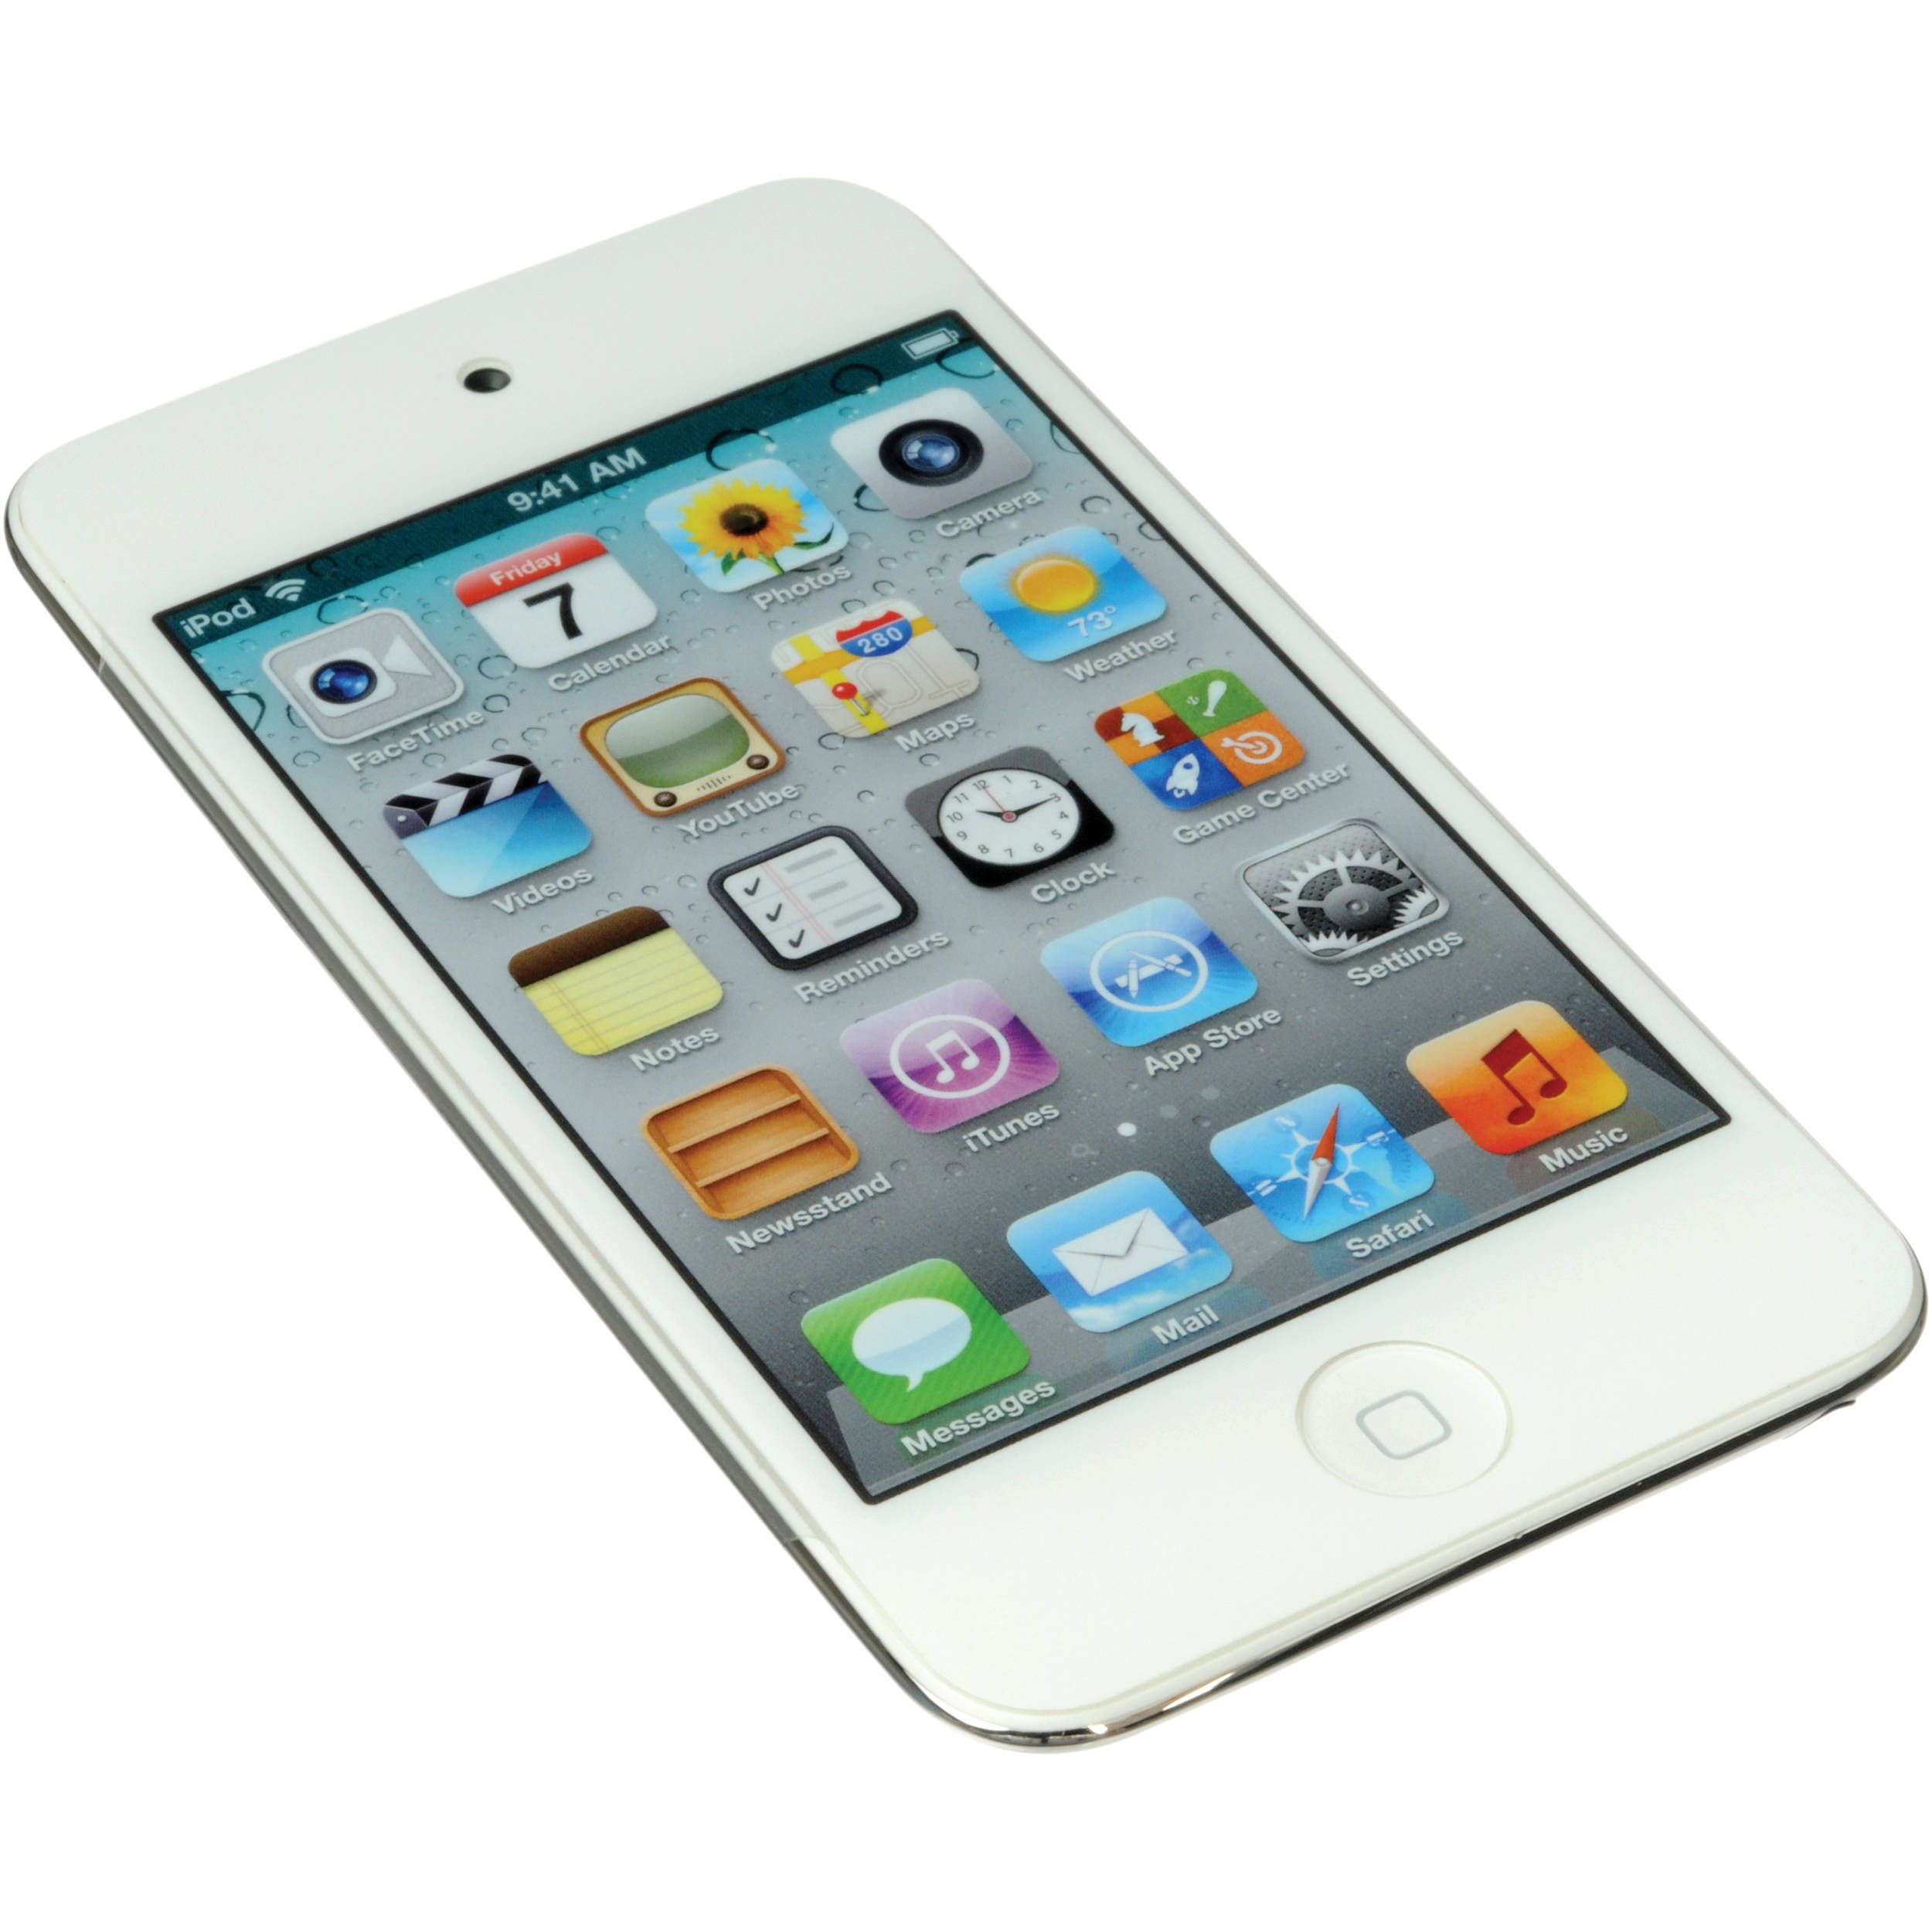 Apple 64GB iPod touch (White) (4th Generation)